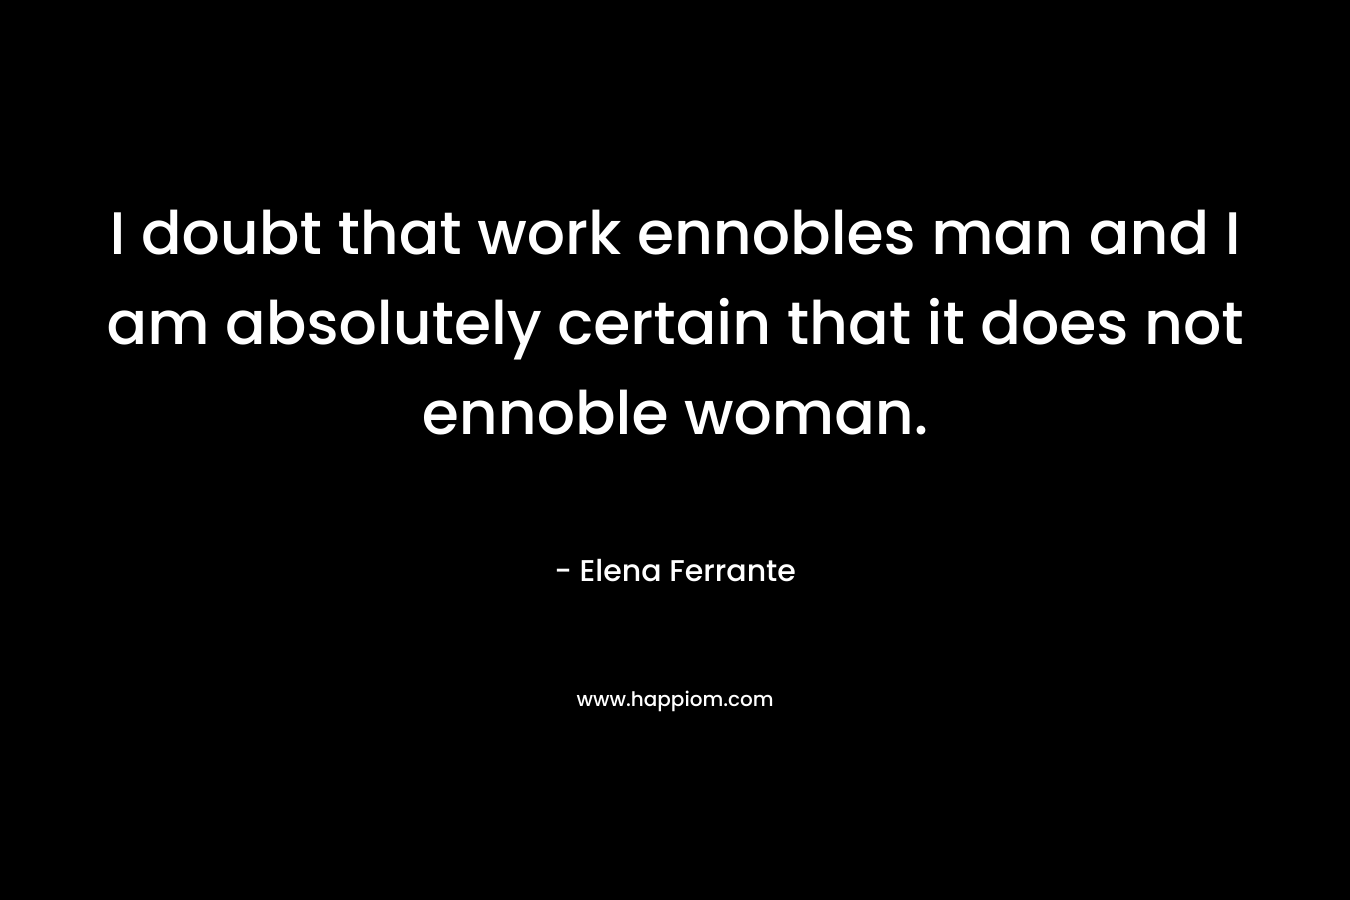 I doubt that work ennobles man and I am absolutely certain that it does not ennoble woman. – Elena Ferrante